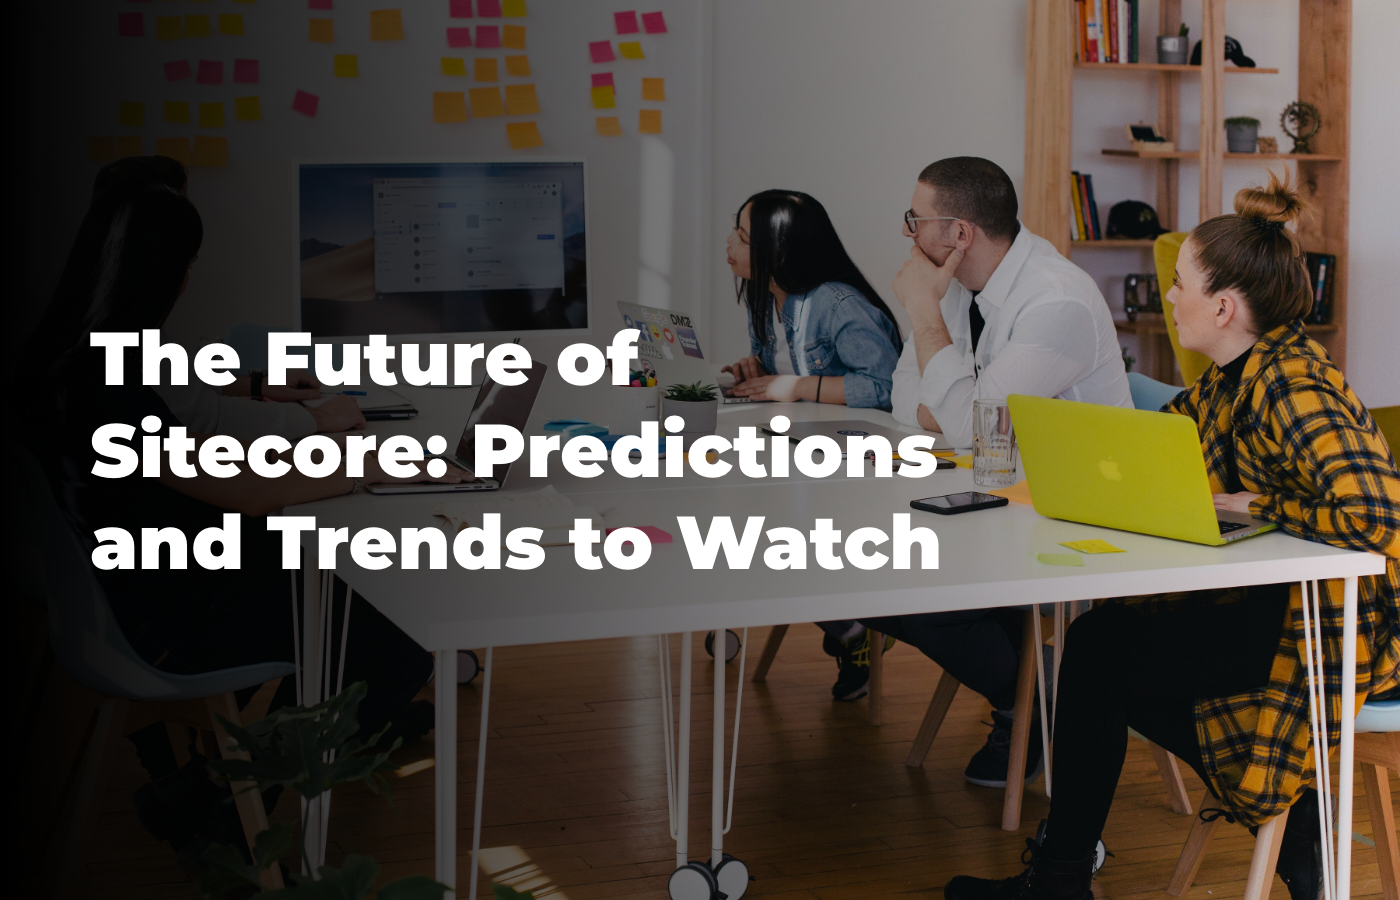 The Future of Sitecore Predictions and Trends to Watch